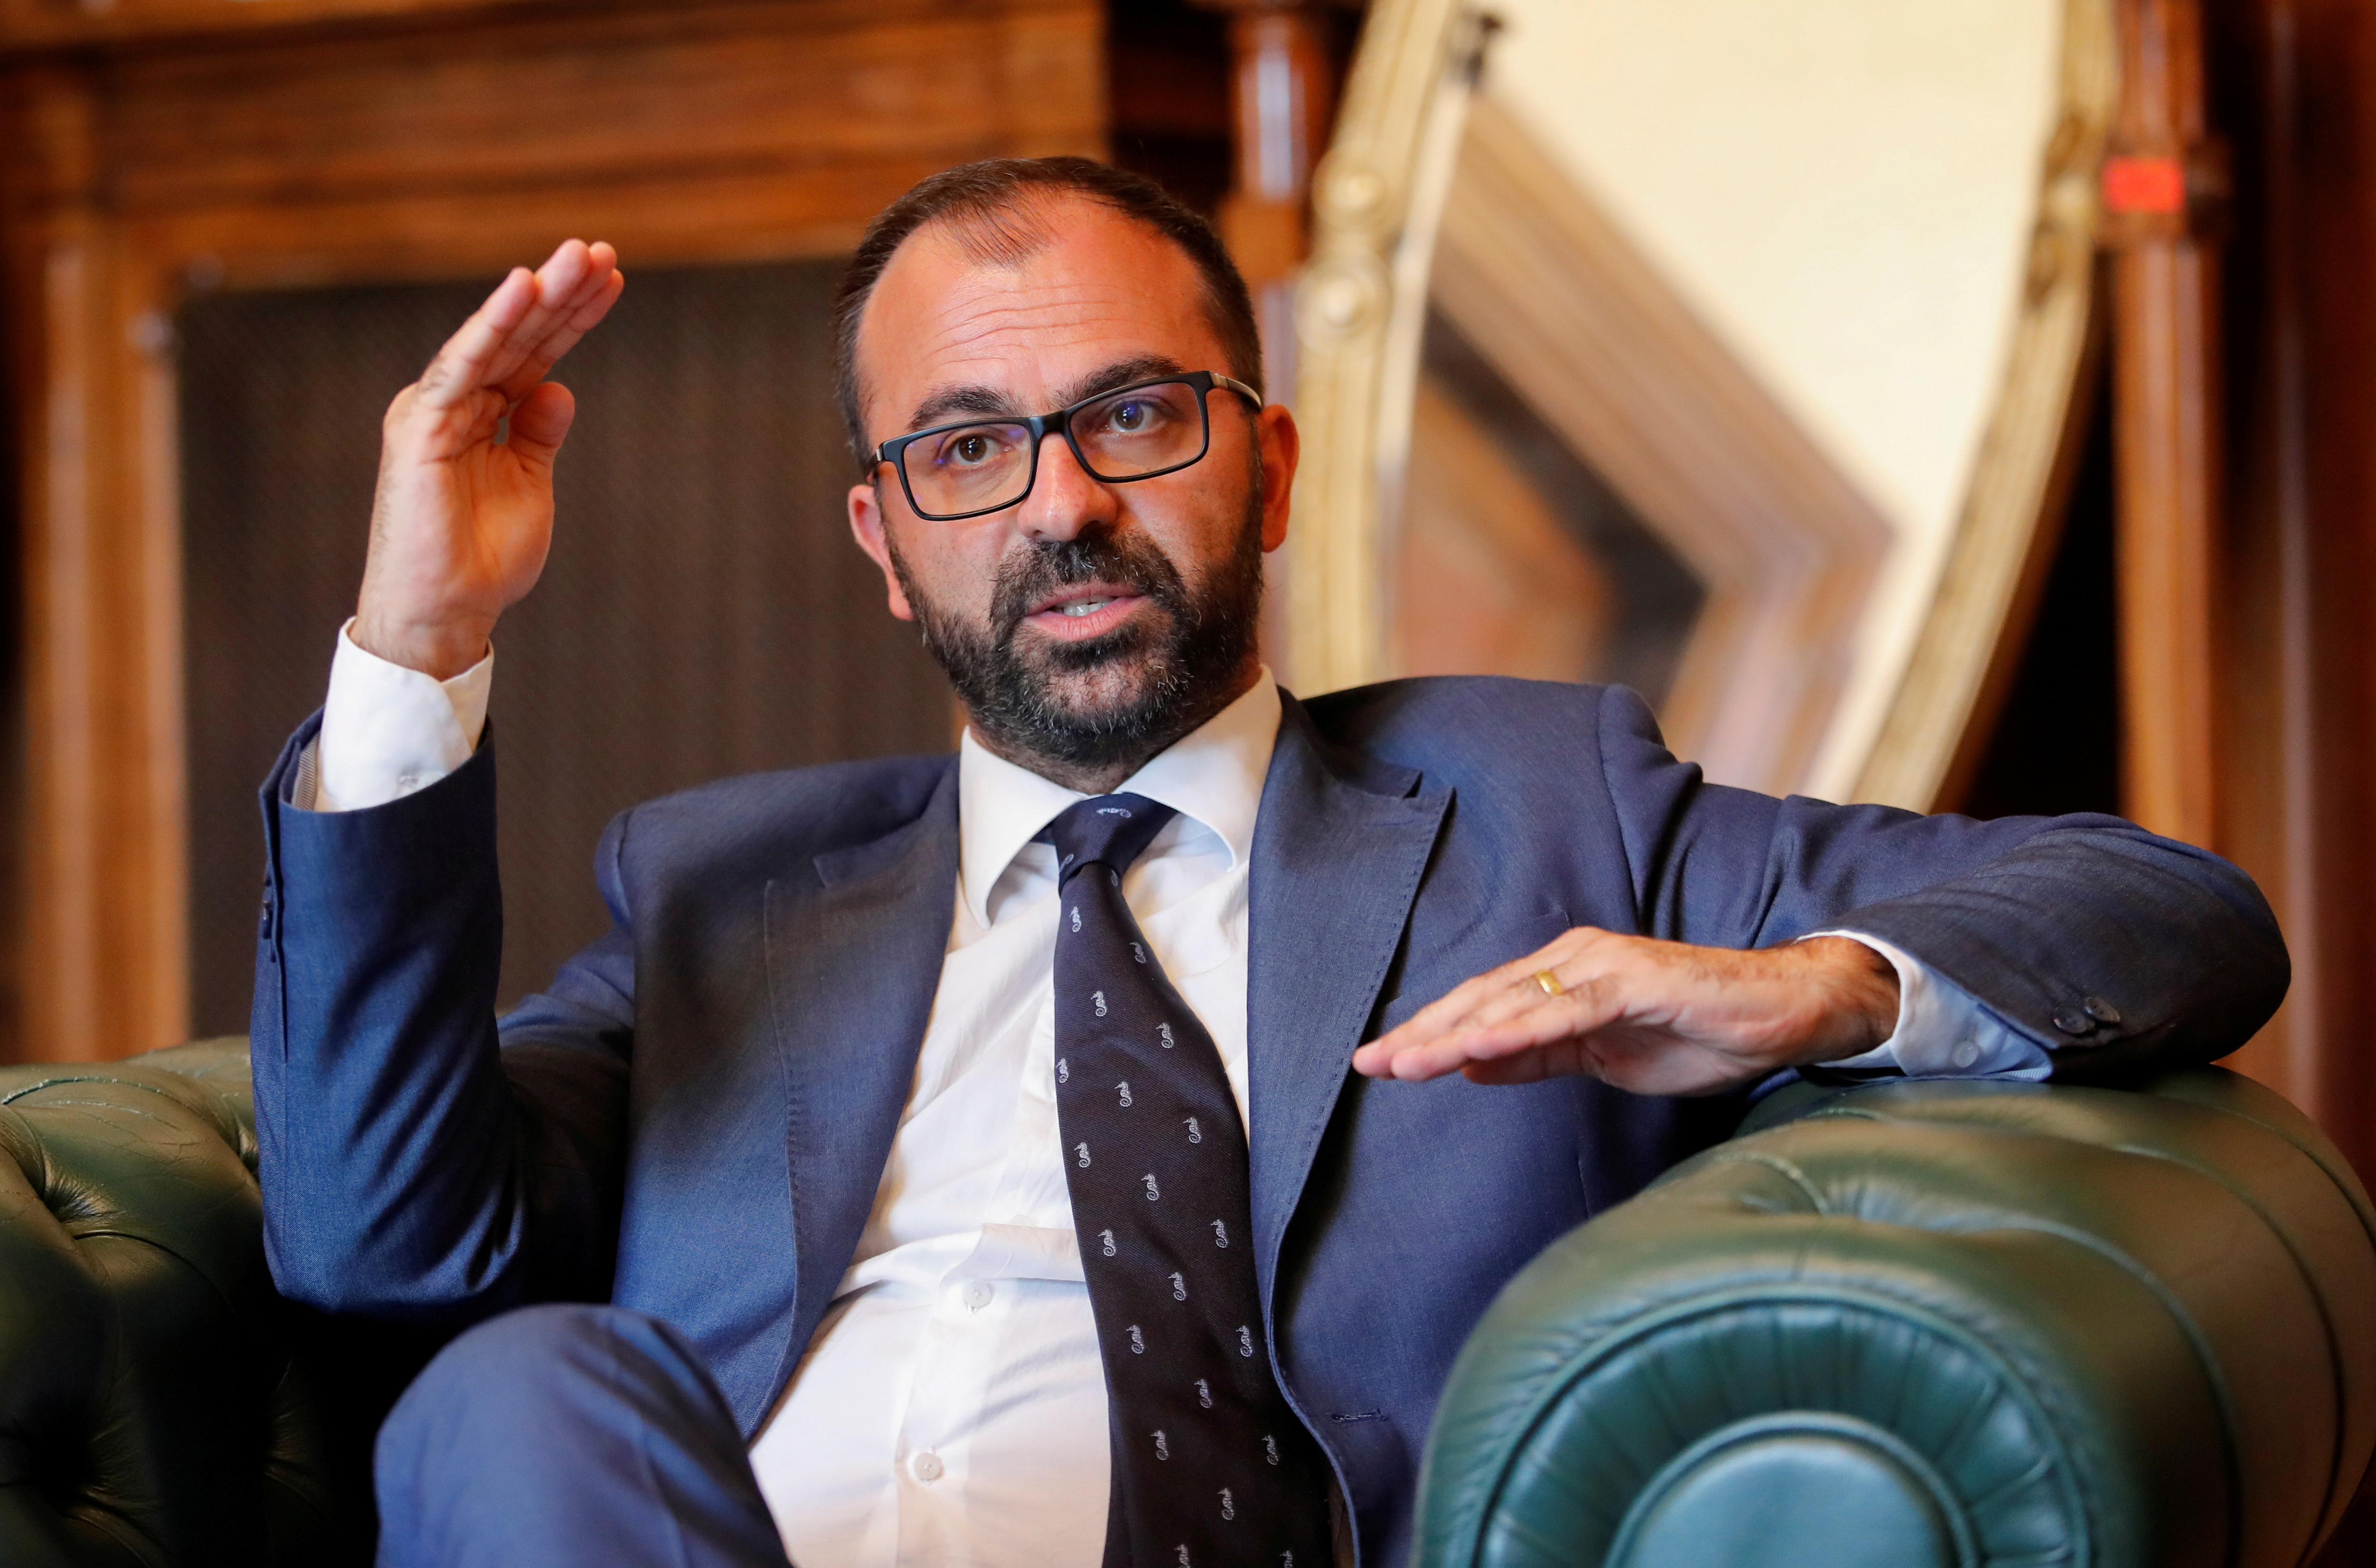 Italy's Education Minister Lorenzo Fioramonti gestures during an interview with Reuters in Rome